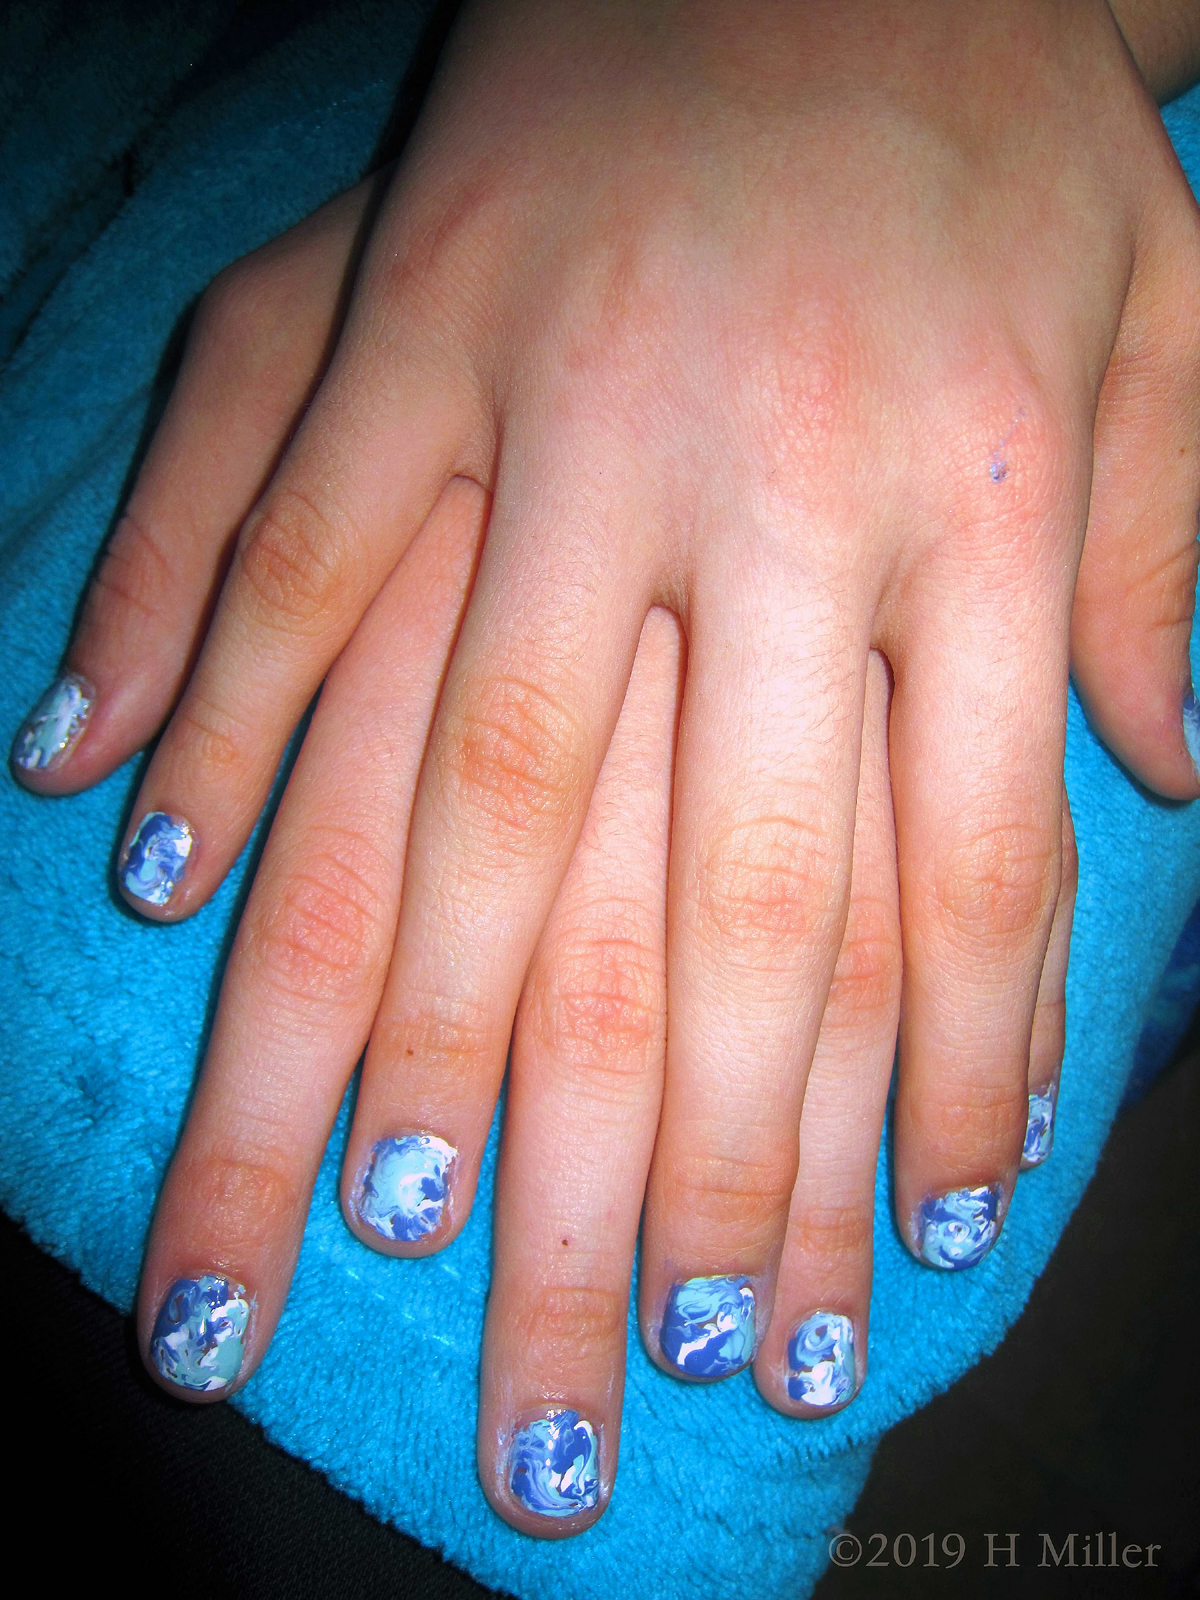 Fabulous Swirled Marble Nail Art Design On This Kids Manicure!